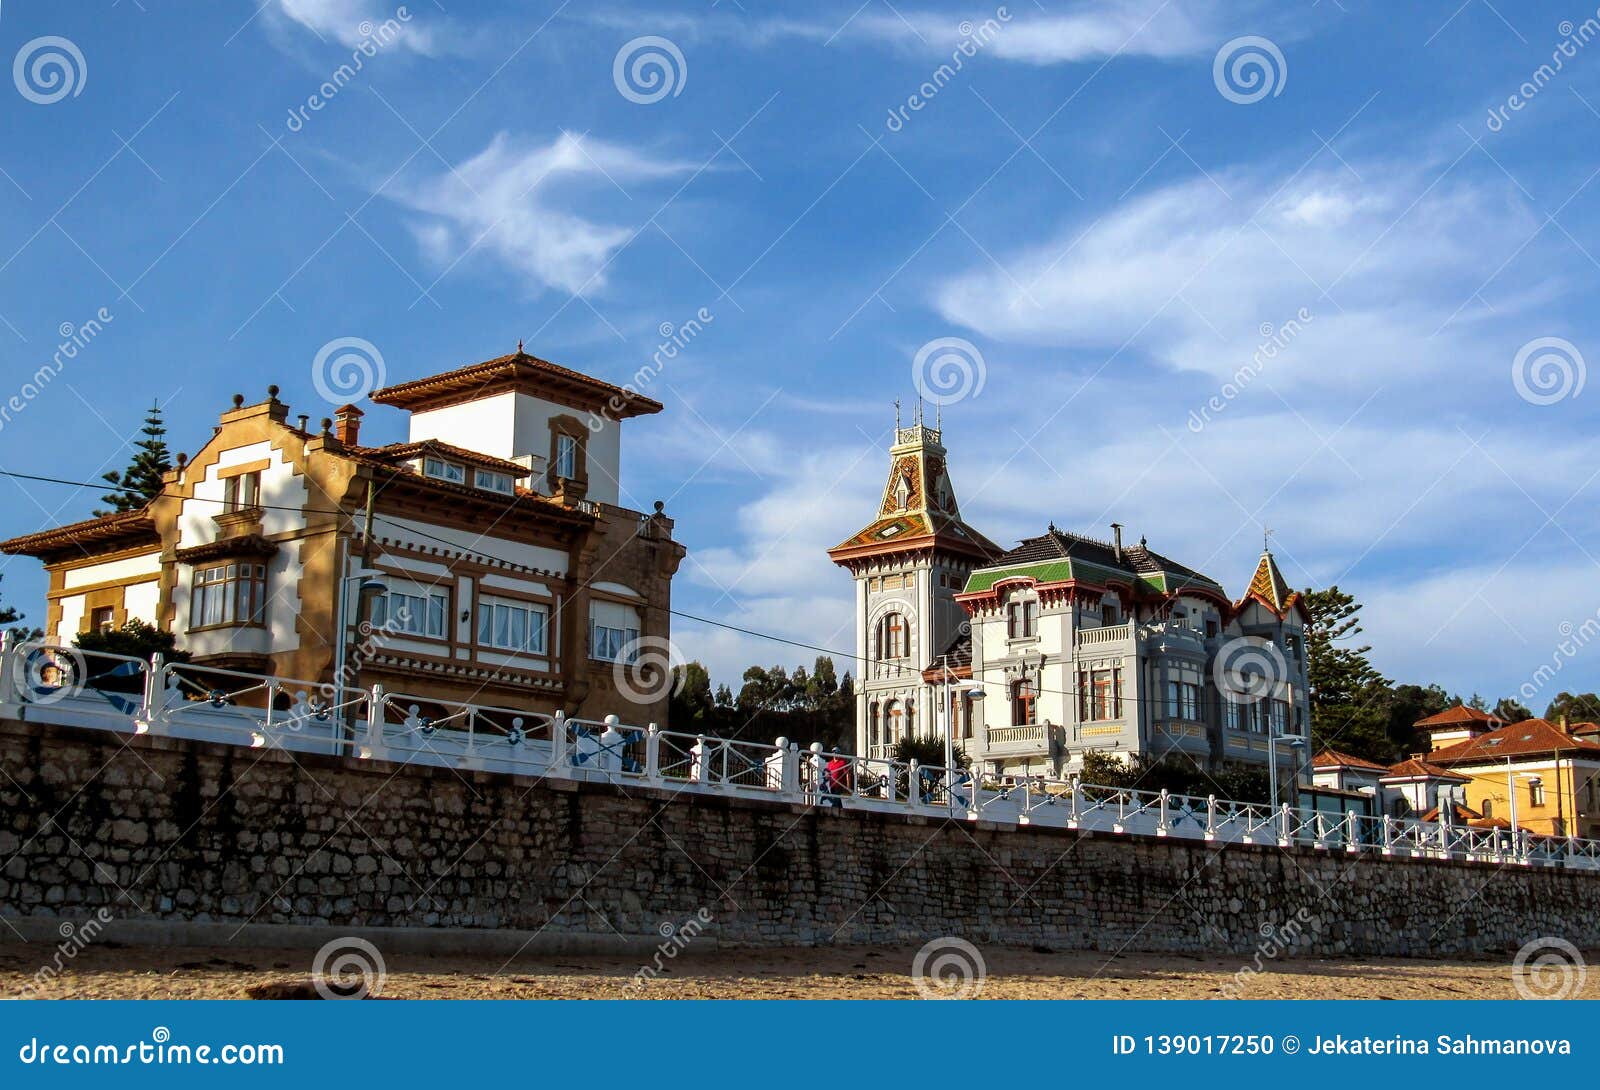 houses in ribadesella on asturias, camino del norte route, northern coast of green spain